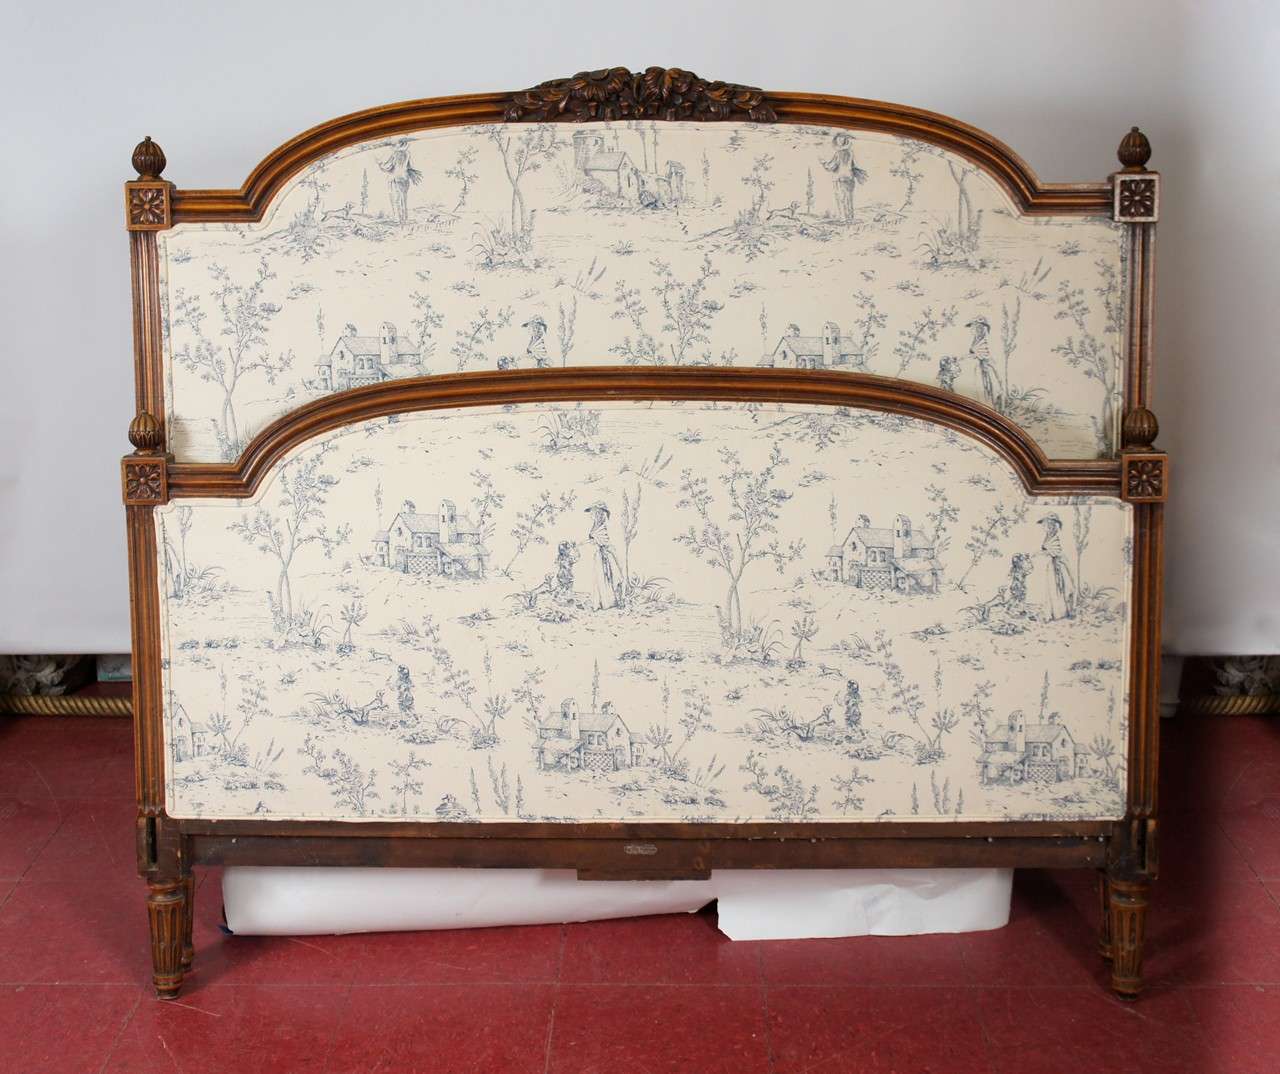 Louis XVI-style head headboard, upholstered in blue Toile de Jouy.  Solid wood.  Floral and leaf motif at center top of head board. Label reads 